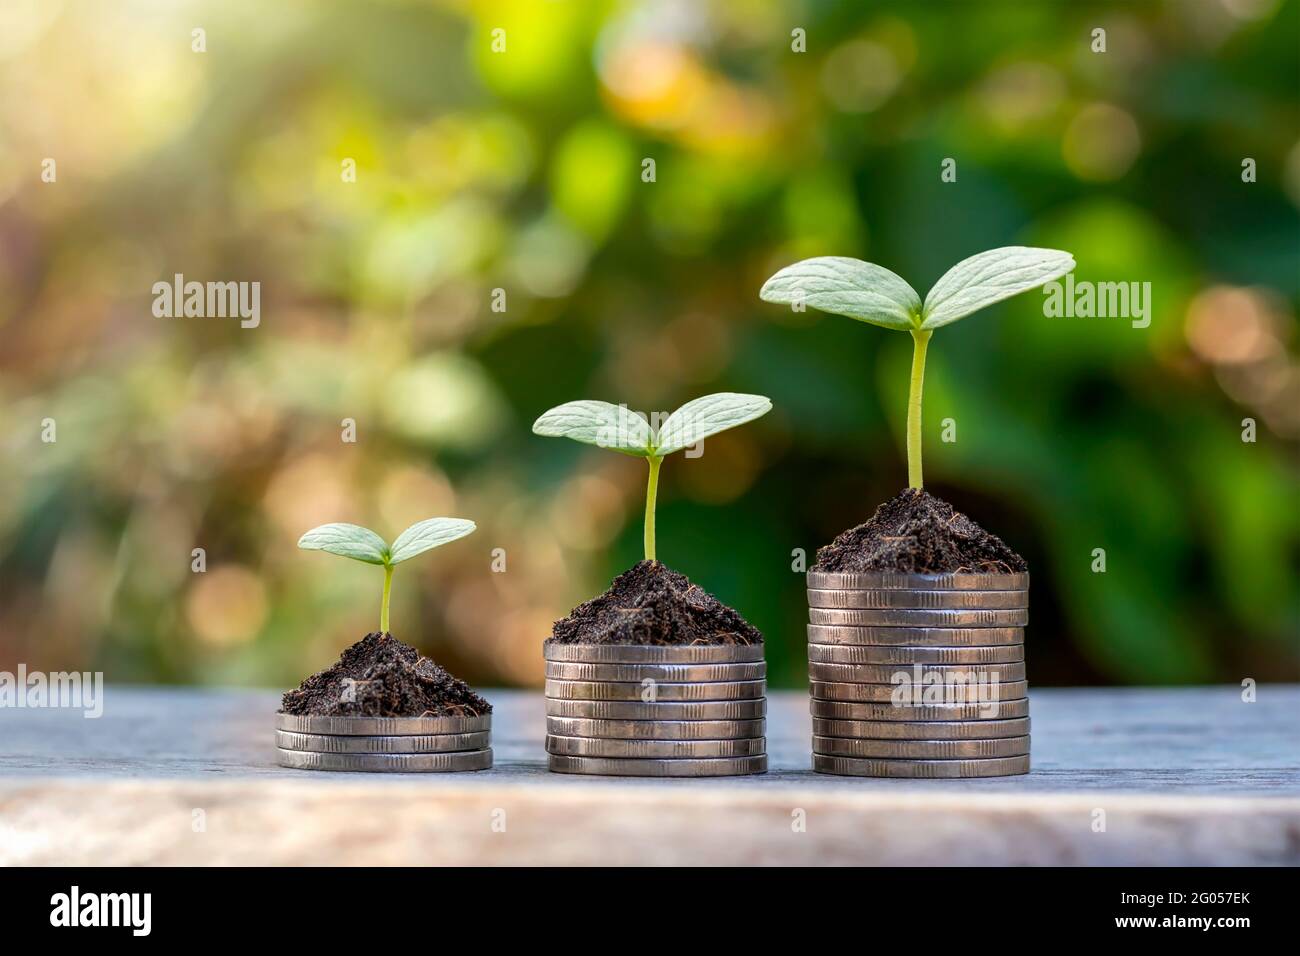 Coins and plants are grown on a pile of coins for finance and banking. The idea of saving money and increasing finances. Stock Photo